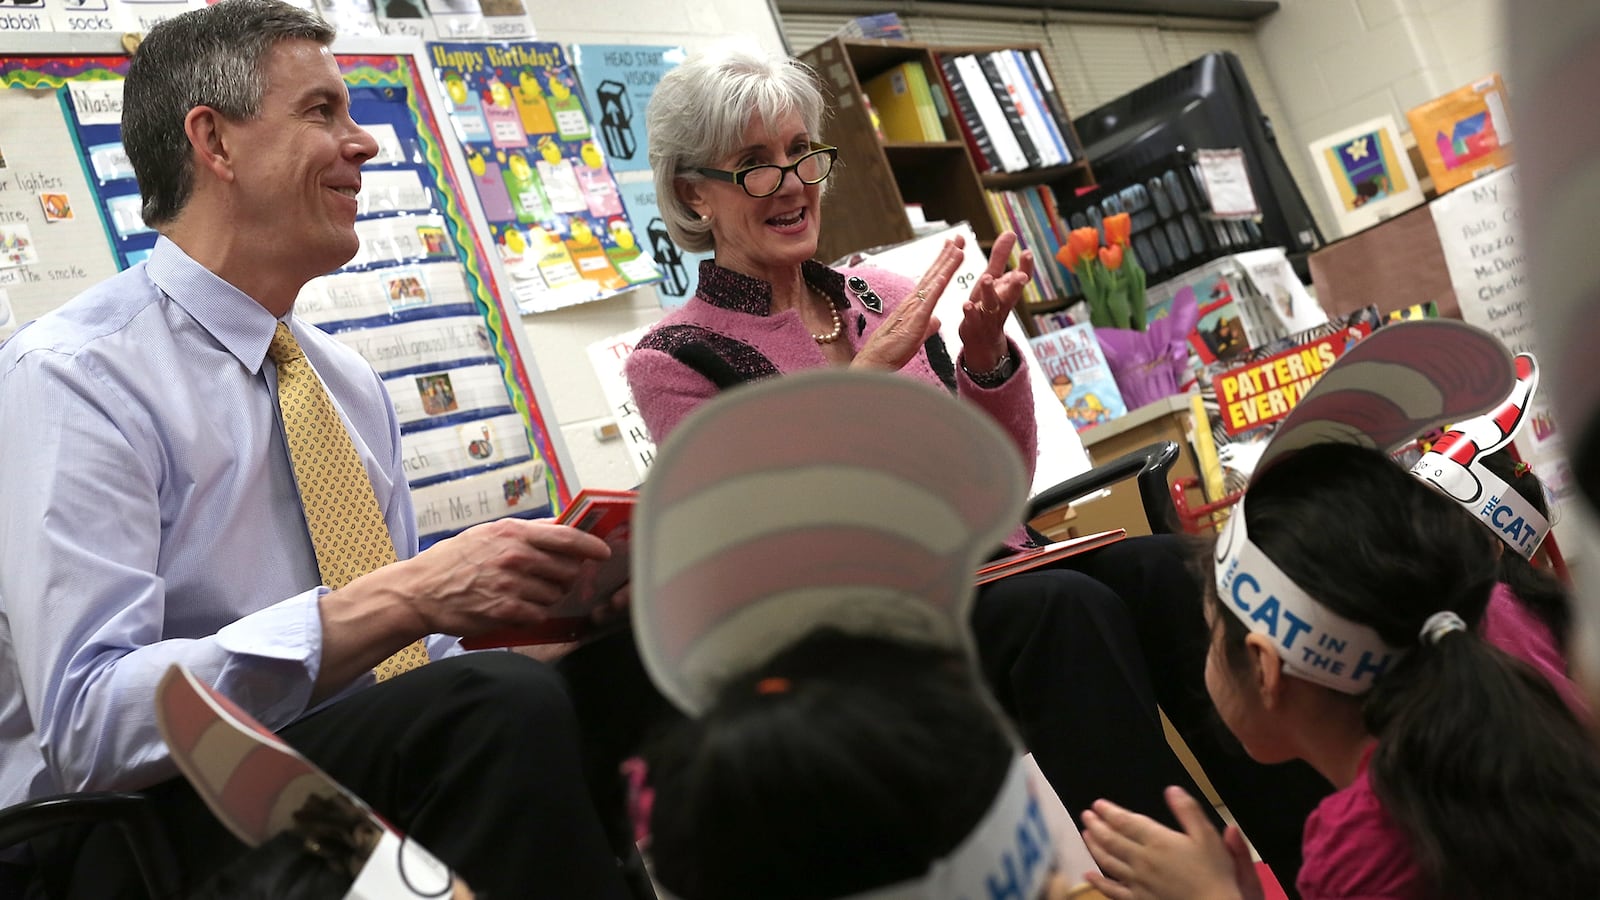 Education Secretary Arne Duncan and HHS Secretary Kathleen Sebelius read to students enrolled in a Head Start program at Rolling Terrace Elementary School March 1, 2013 in Takoma Park, Maryland. (Photo by Win McNamee/Getty Images)